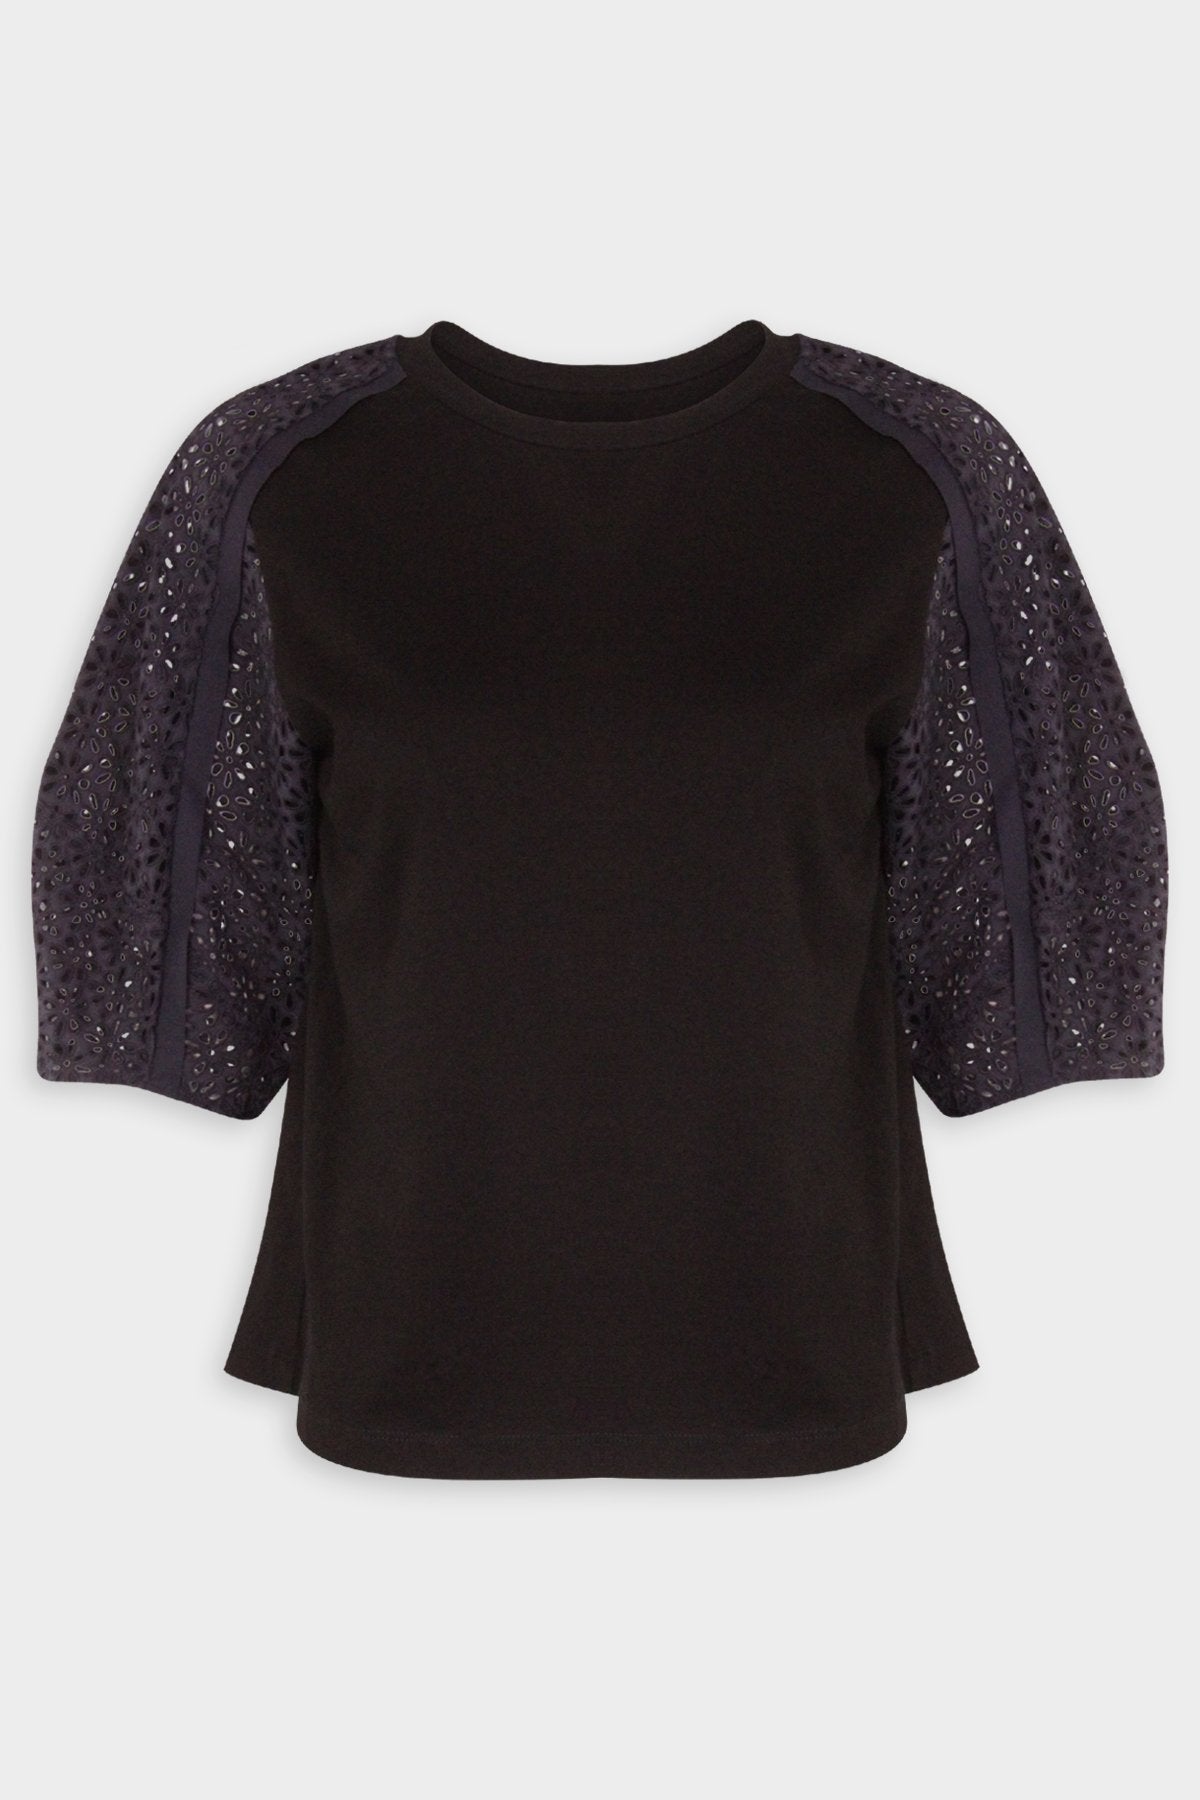 Broderie Anglaise Combo T-Shirt in Black Midnight - shop-olivia.com